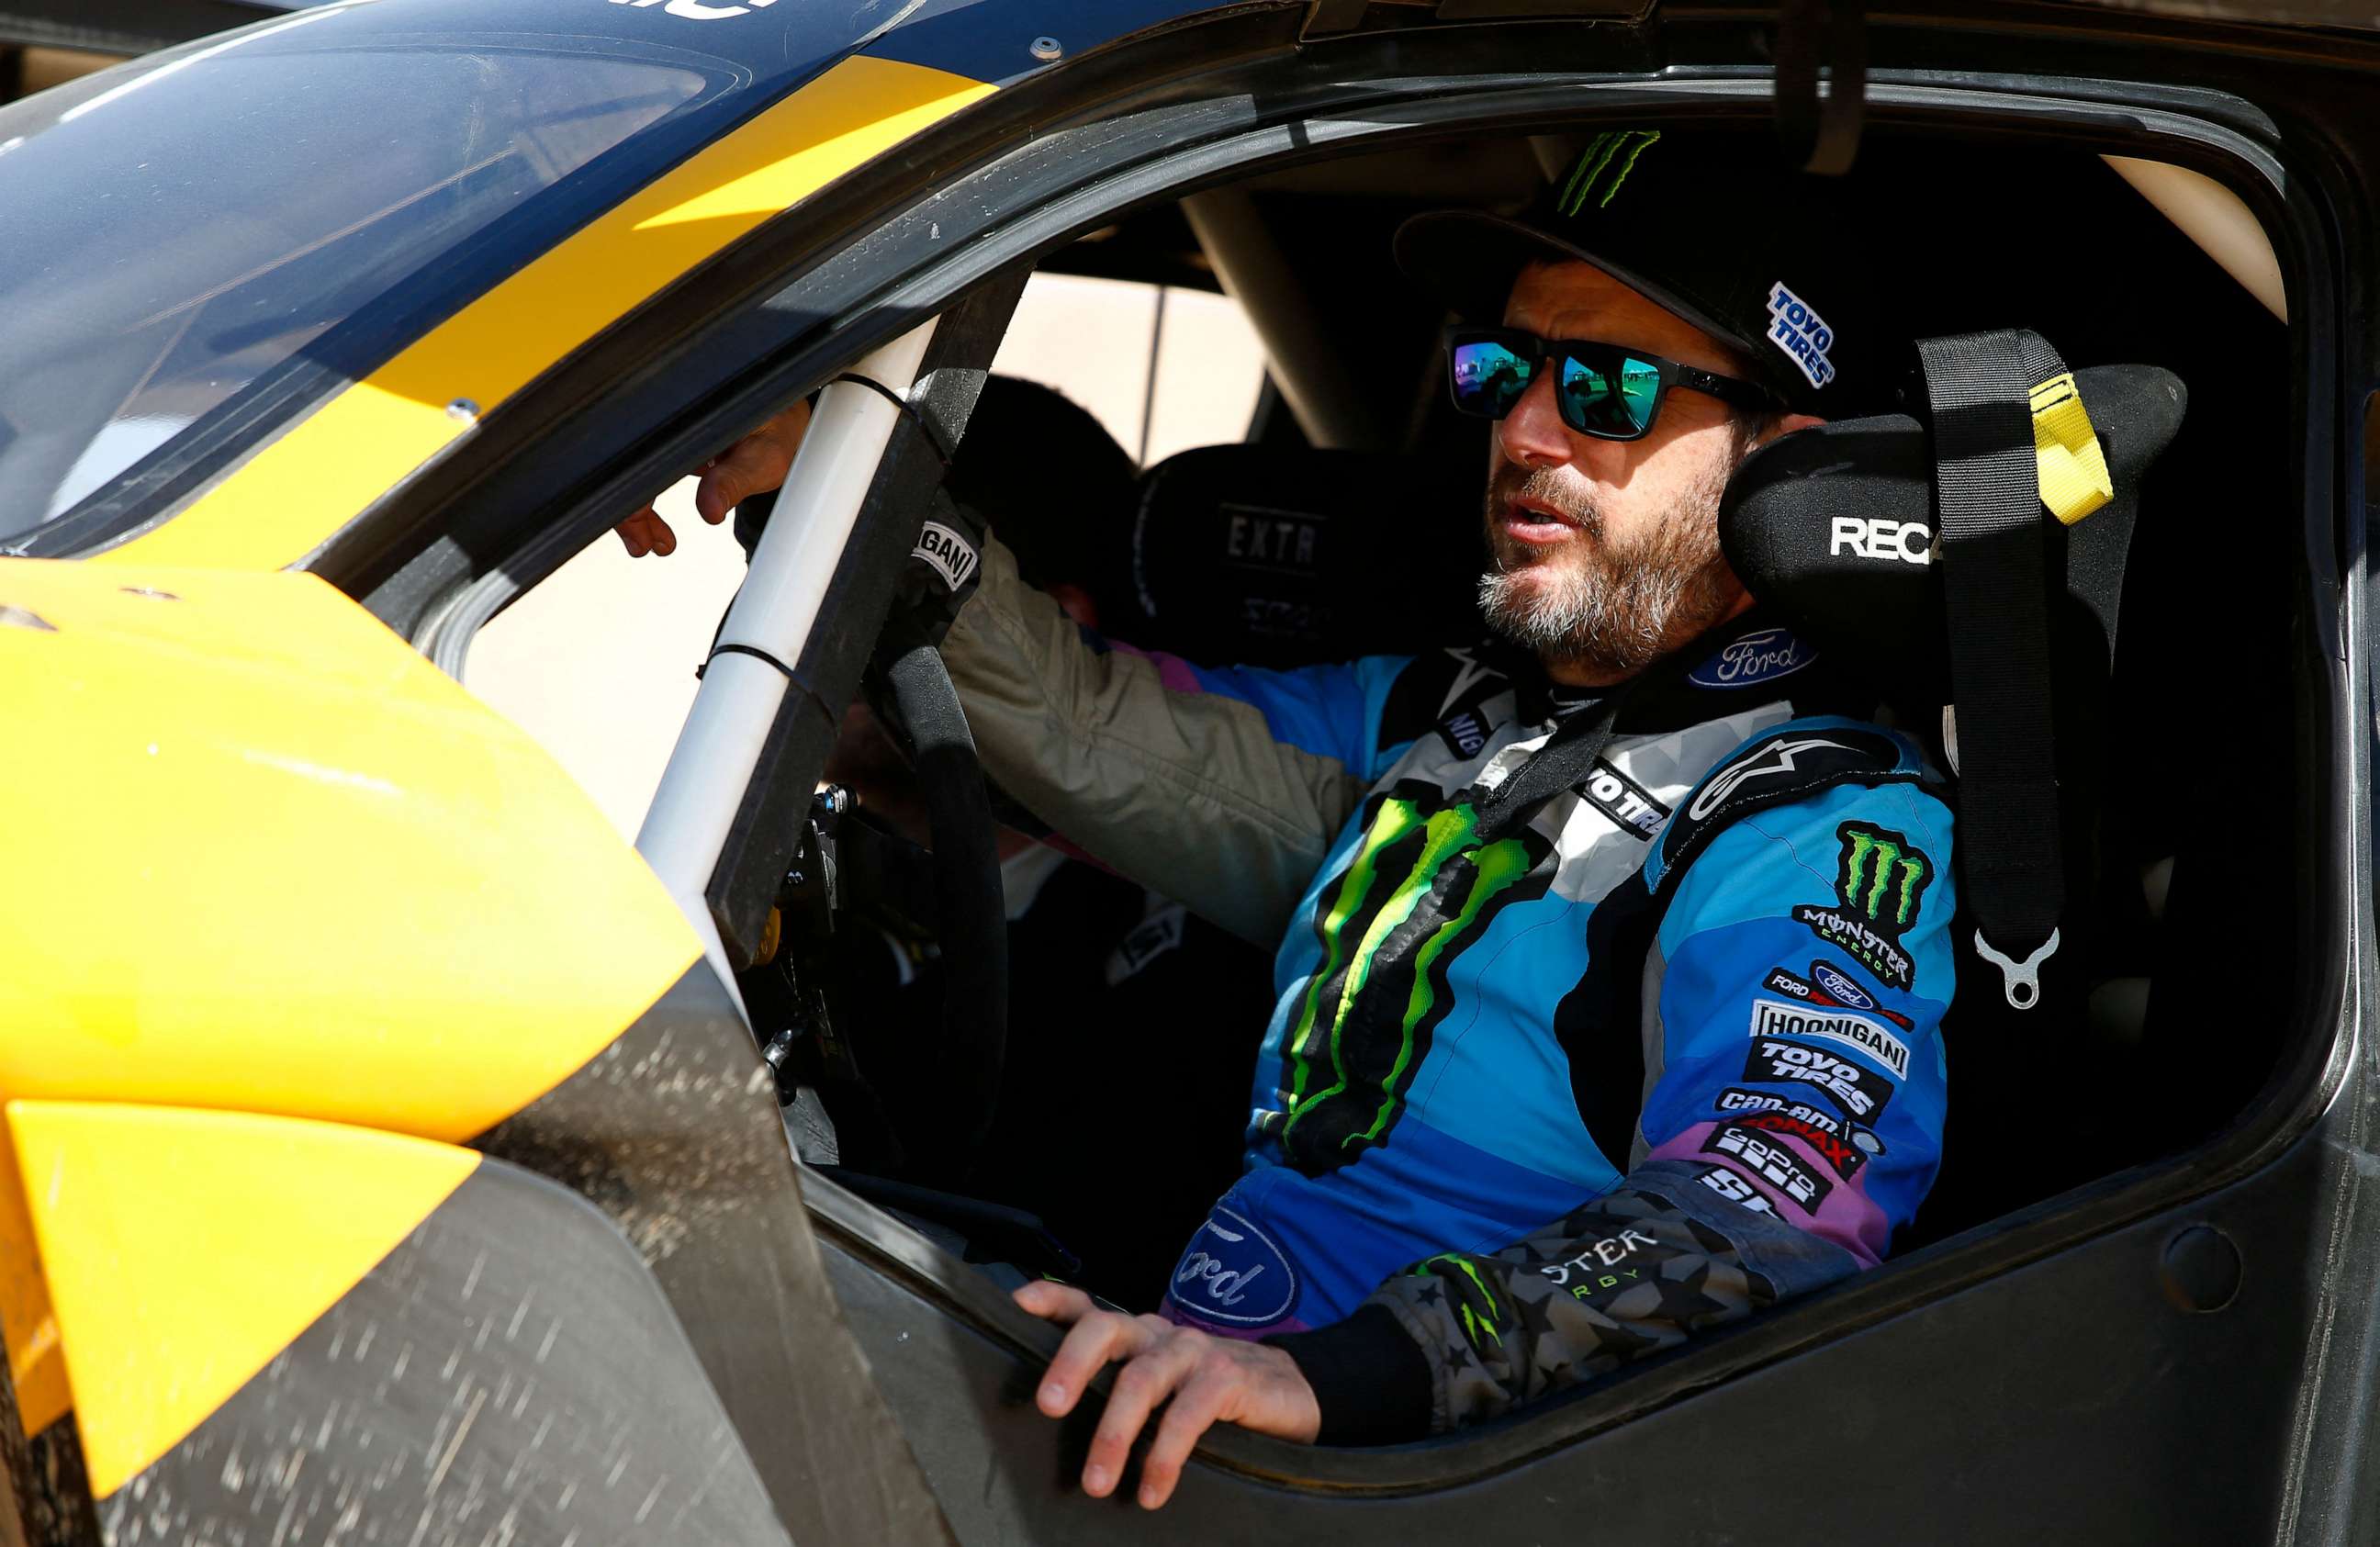 PHOTO: (FILES) In this file photo taken on January 17, 2020, legendary off-road racer and YouTube star Ken Block prepares to take the wheel of Extreme Es E-SUV to take part in the Grand Prix of Qiddiya finale of the Dakar 2020.